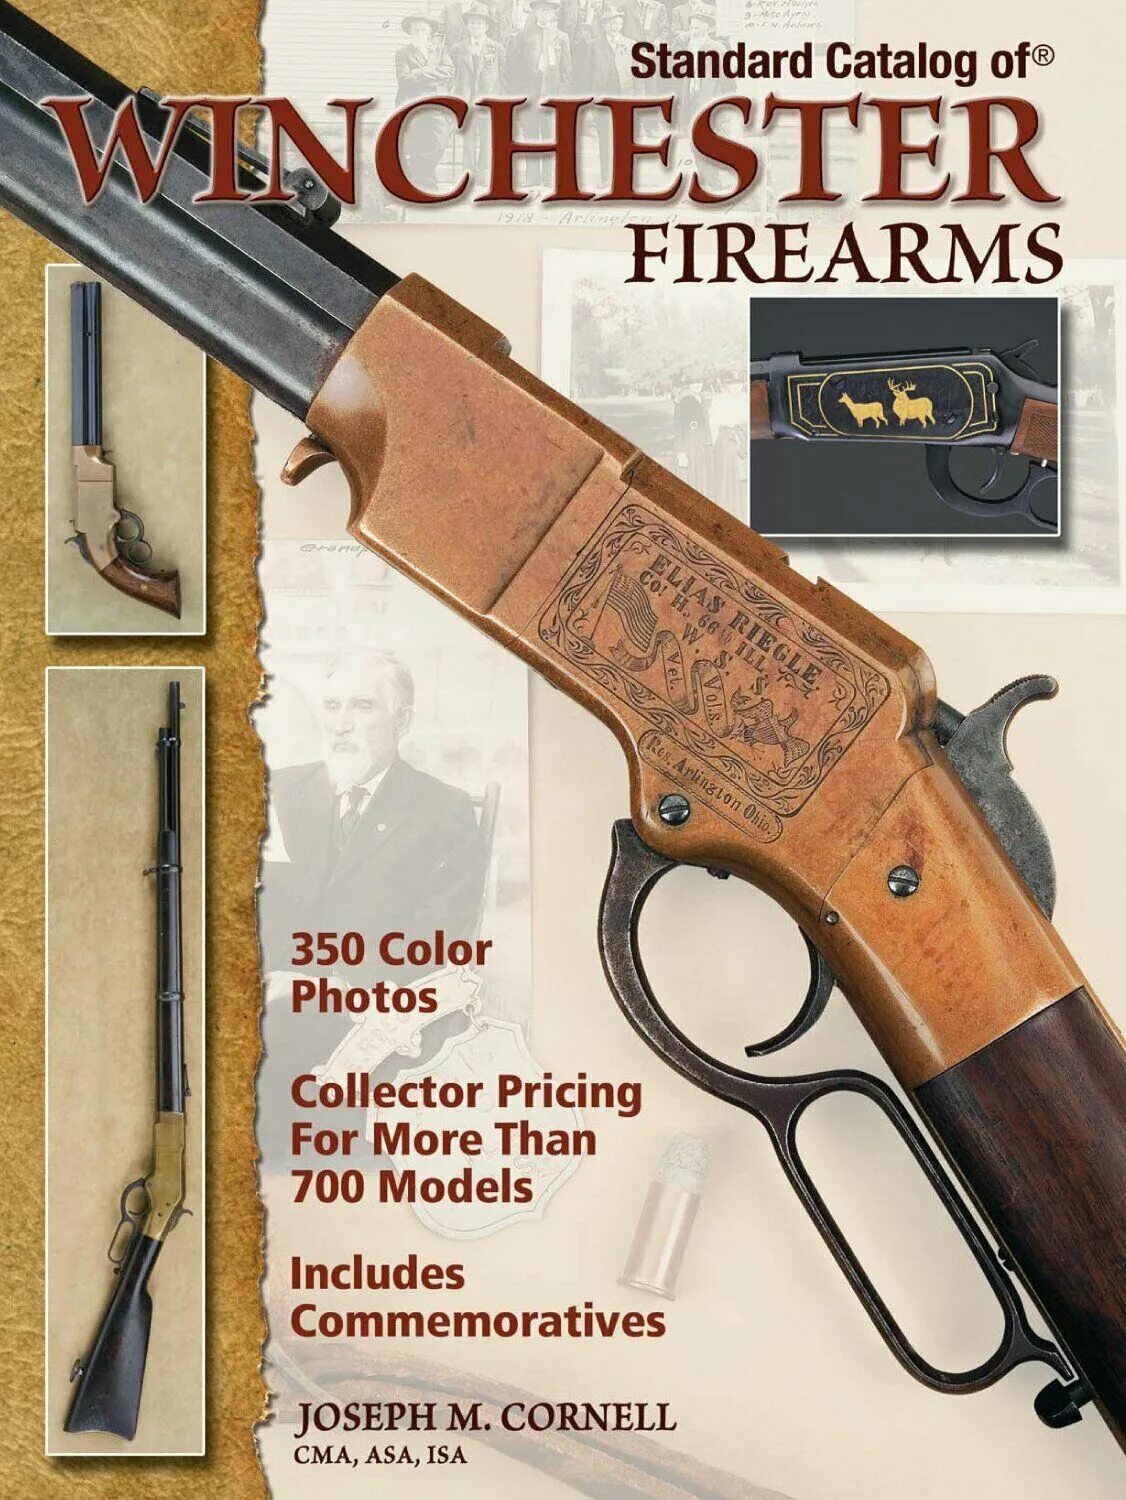 GS Winchester книги. Каталог стандартов. The leading reference for Antique American Arms Flayderman's Guide to Antique …and their values.